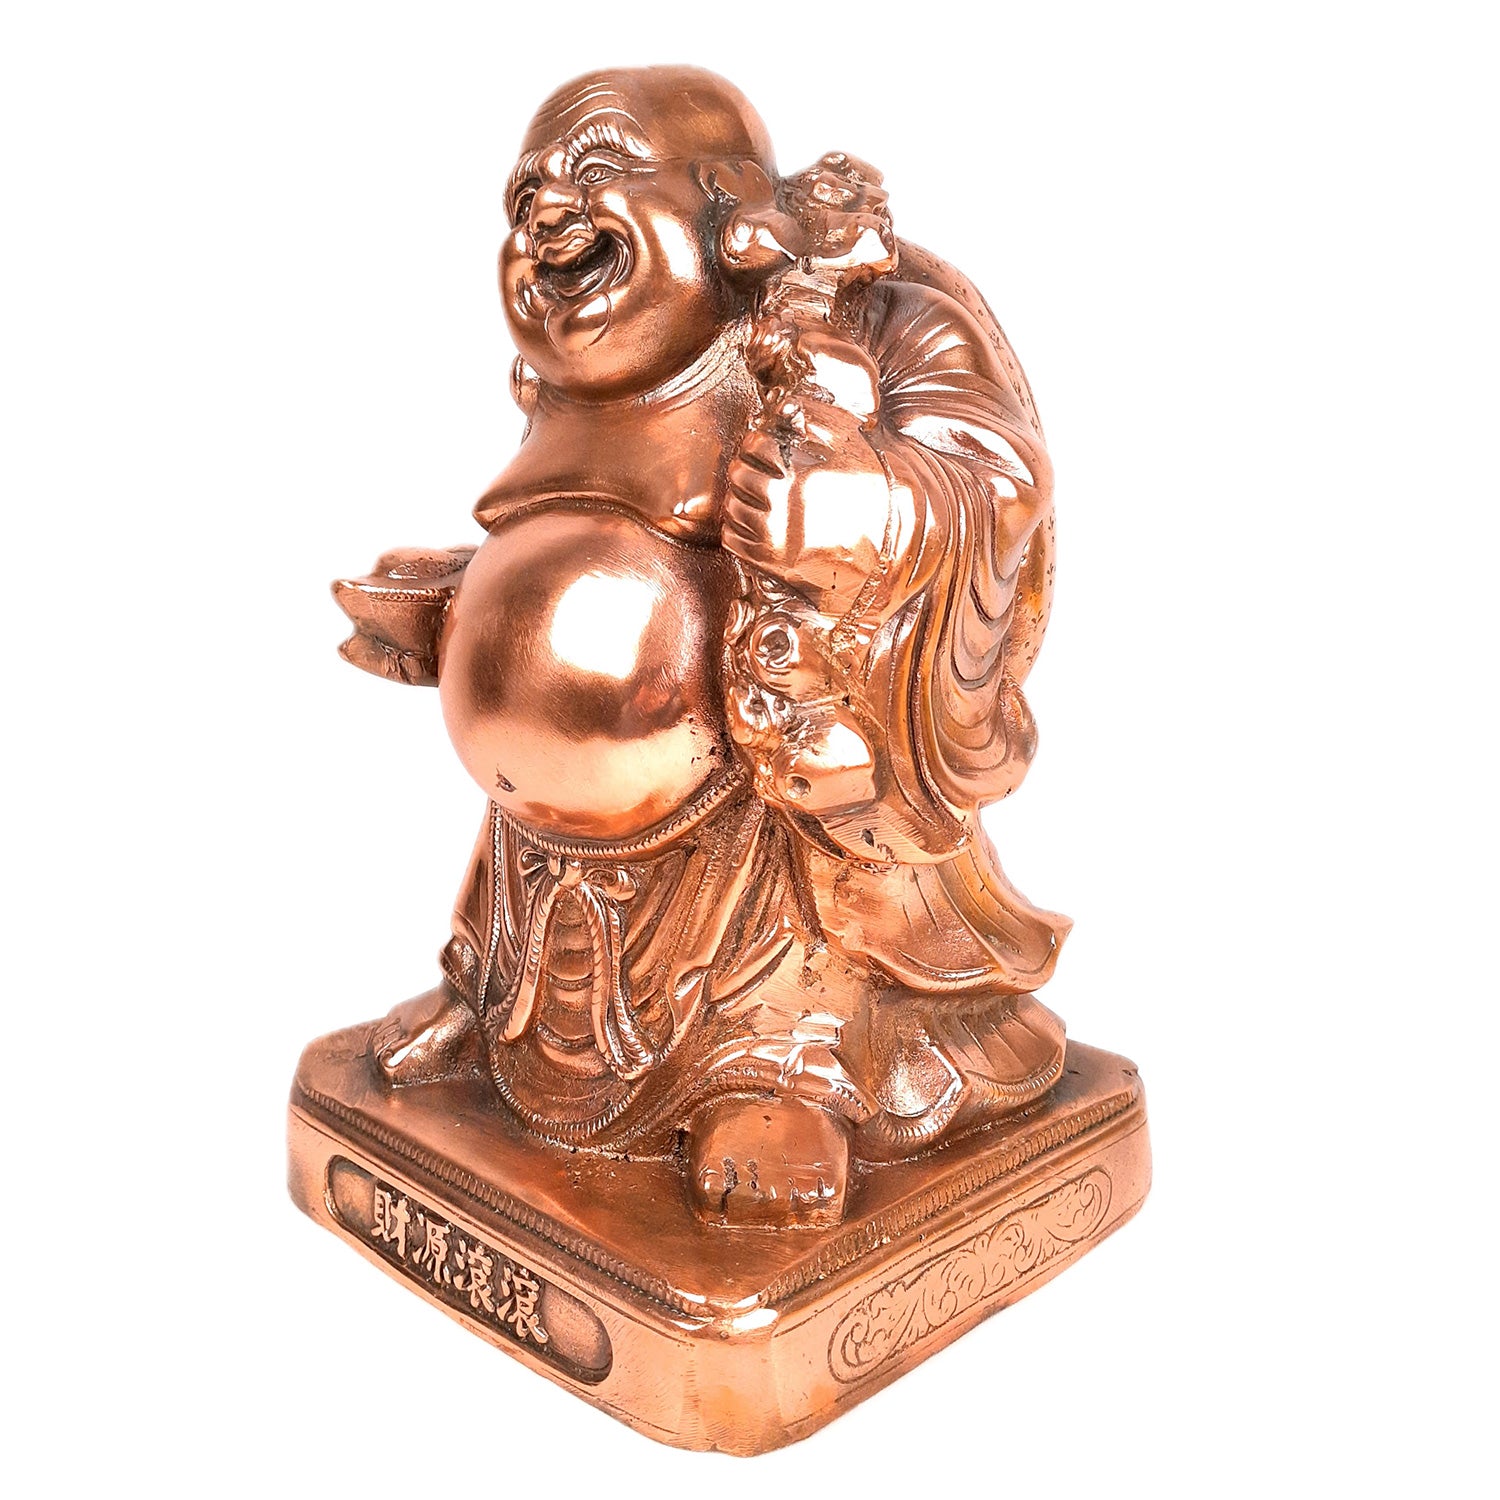 Laughing Buddha Statue | Child Monk Showpiece with Money Bag for Wealth | For Good Luck, Home, Table & Office Decor & Gift - 13 Inch